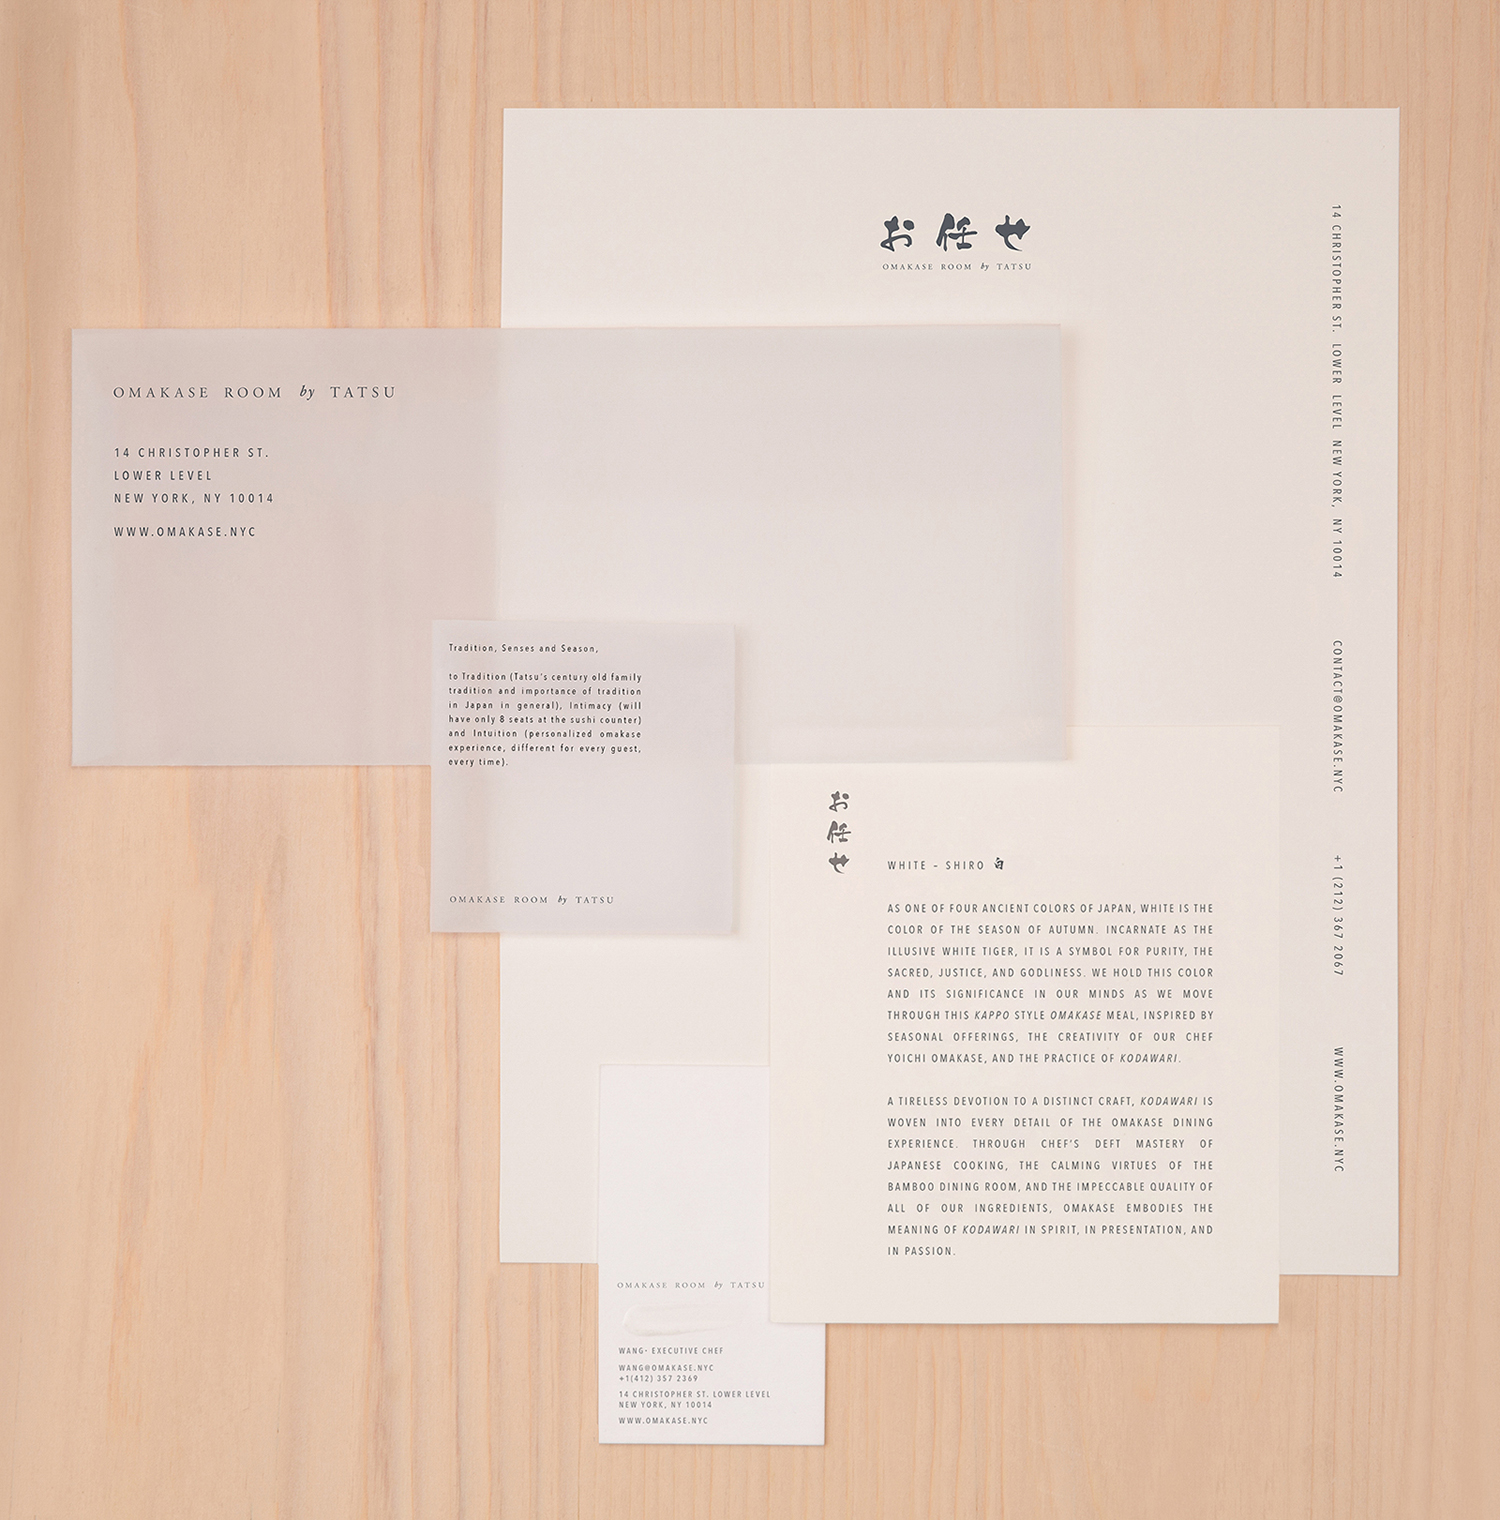 Visual identity and stationery design by Savvy for New York restaurant Omakase Room by Tatsu